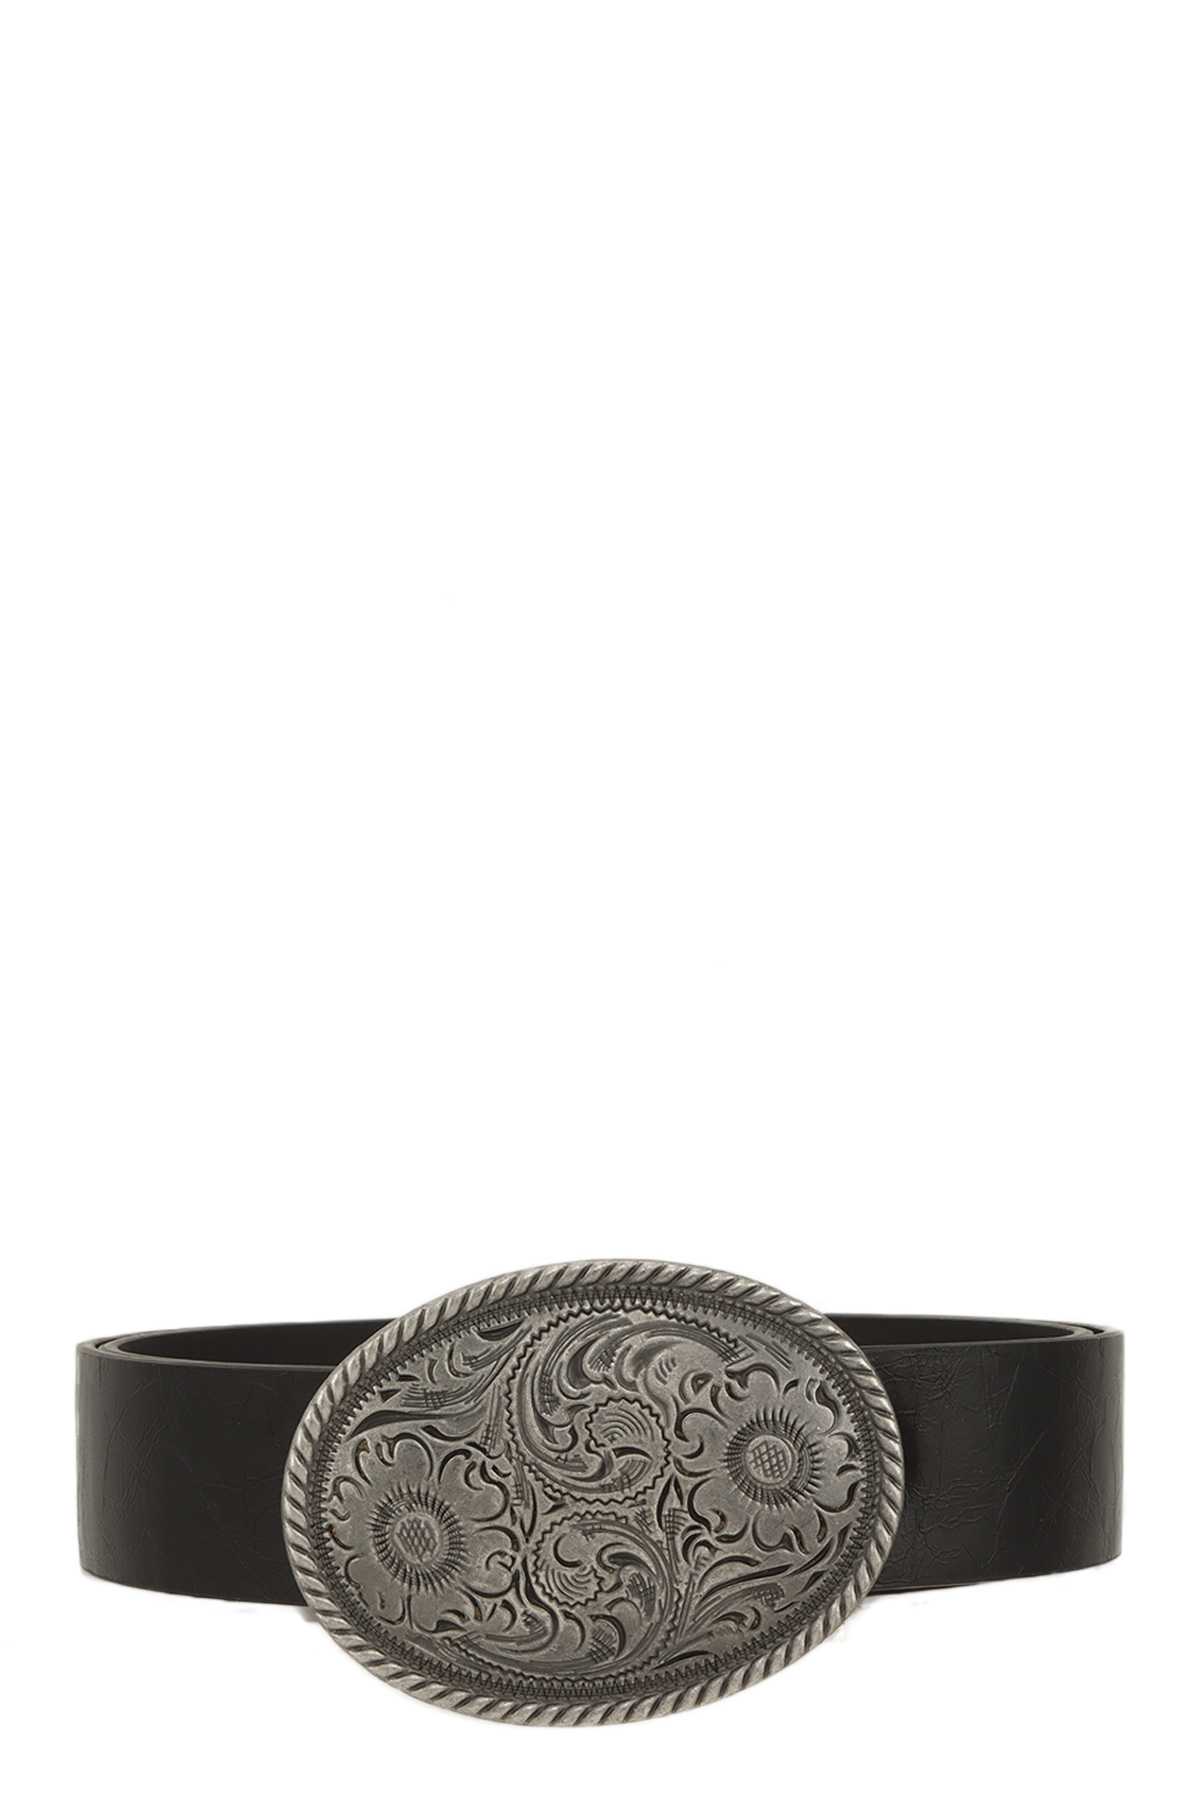 Metal Round and Flower Buckle Pu Leather Belt